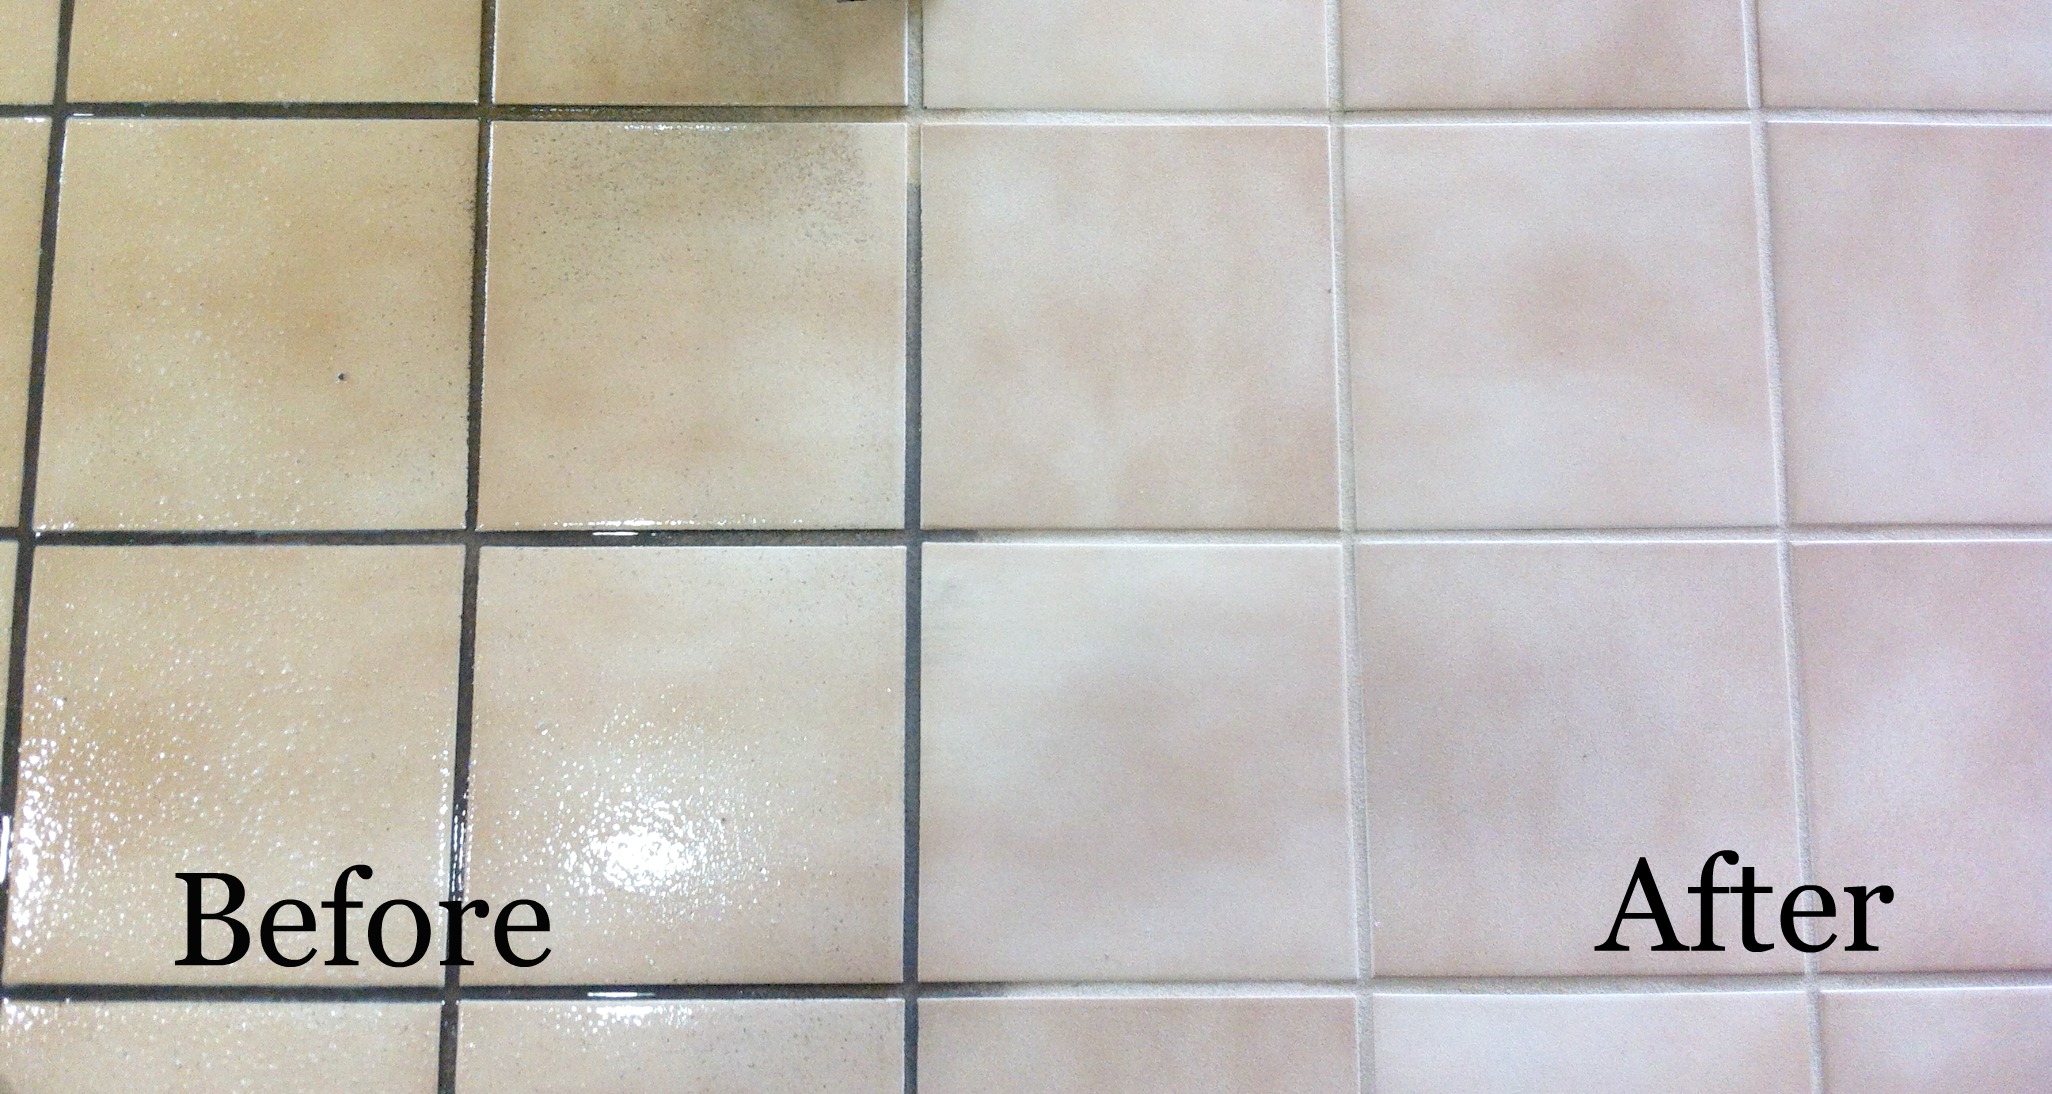 Referral is Fort Wayne's Expert Tile & Grout Cleaner